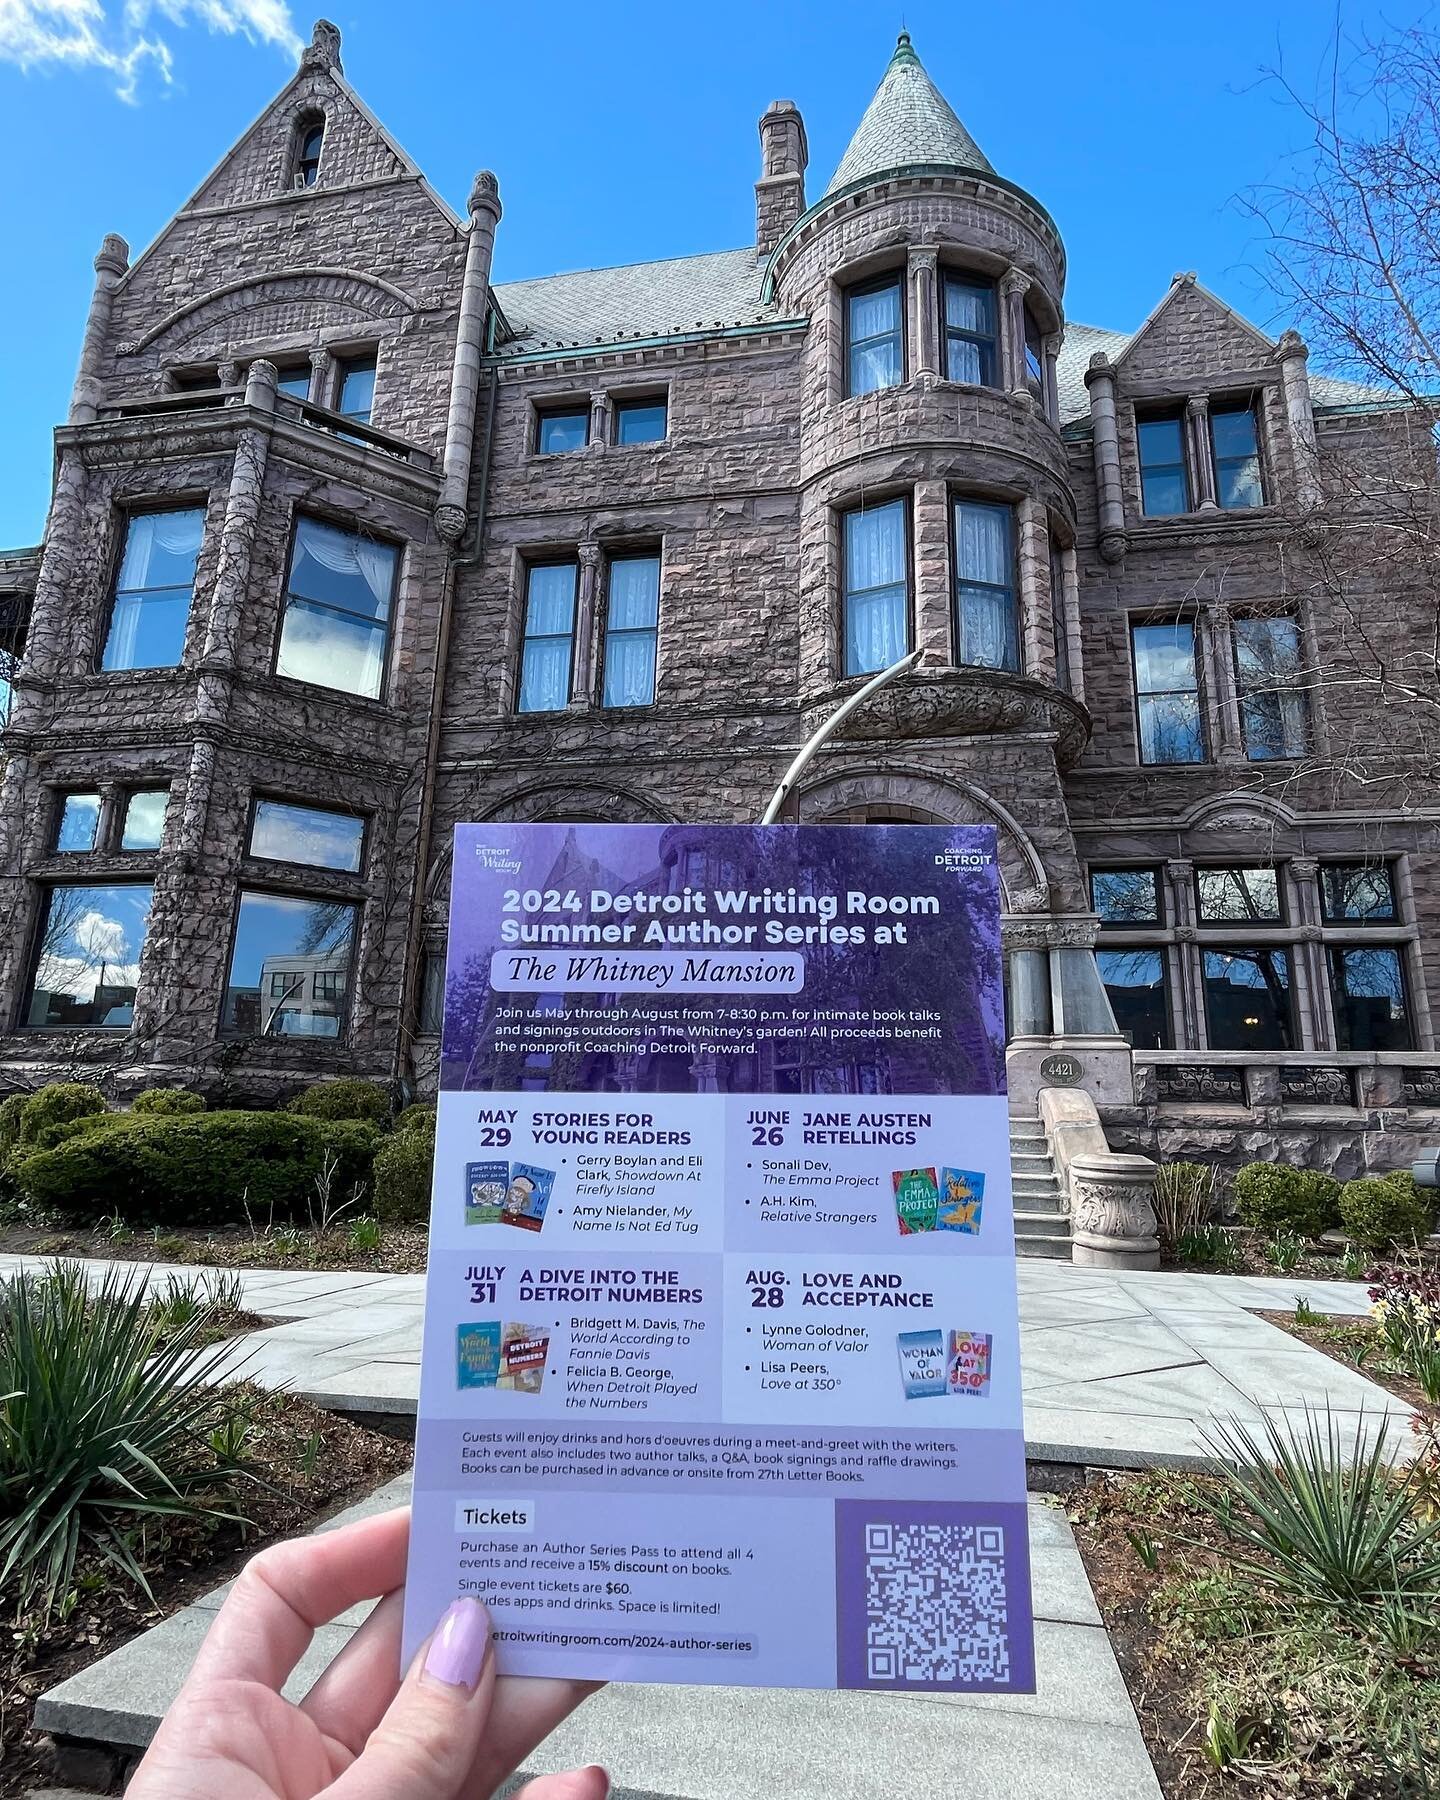 Detroit location trivia time! 🏙

We left several Summer Author Series flyers around the city today. Can you identify any of these spots? Message us with at least one correct location, and we&rsquo;ll share a promo code for 20% off Author Series tick